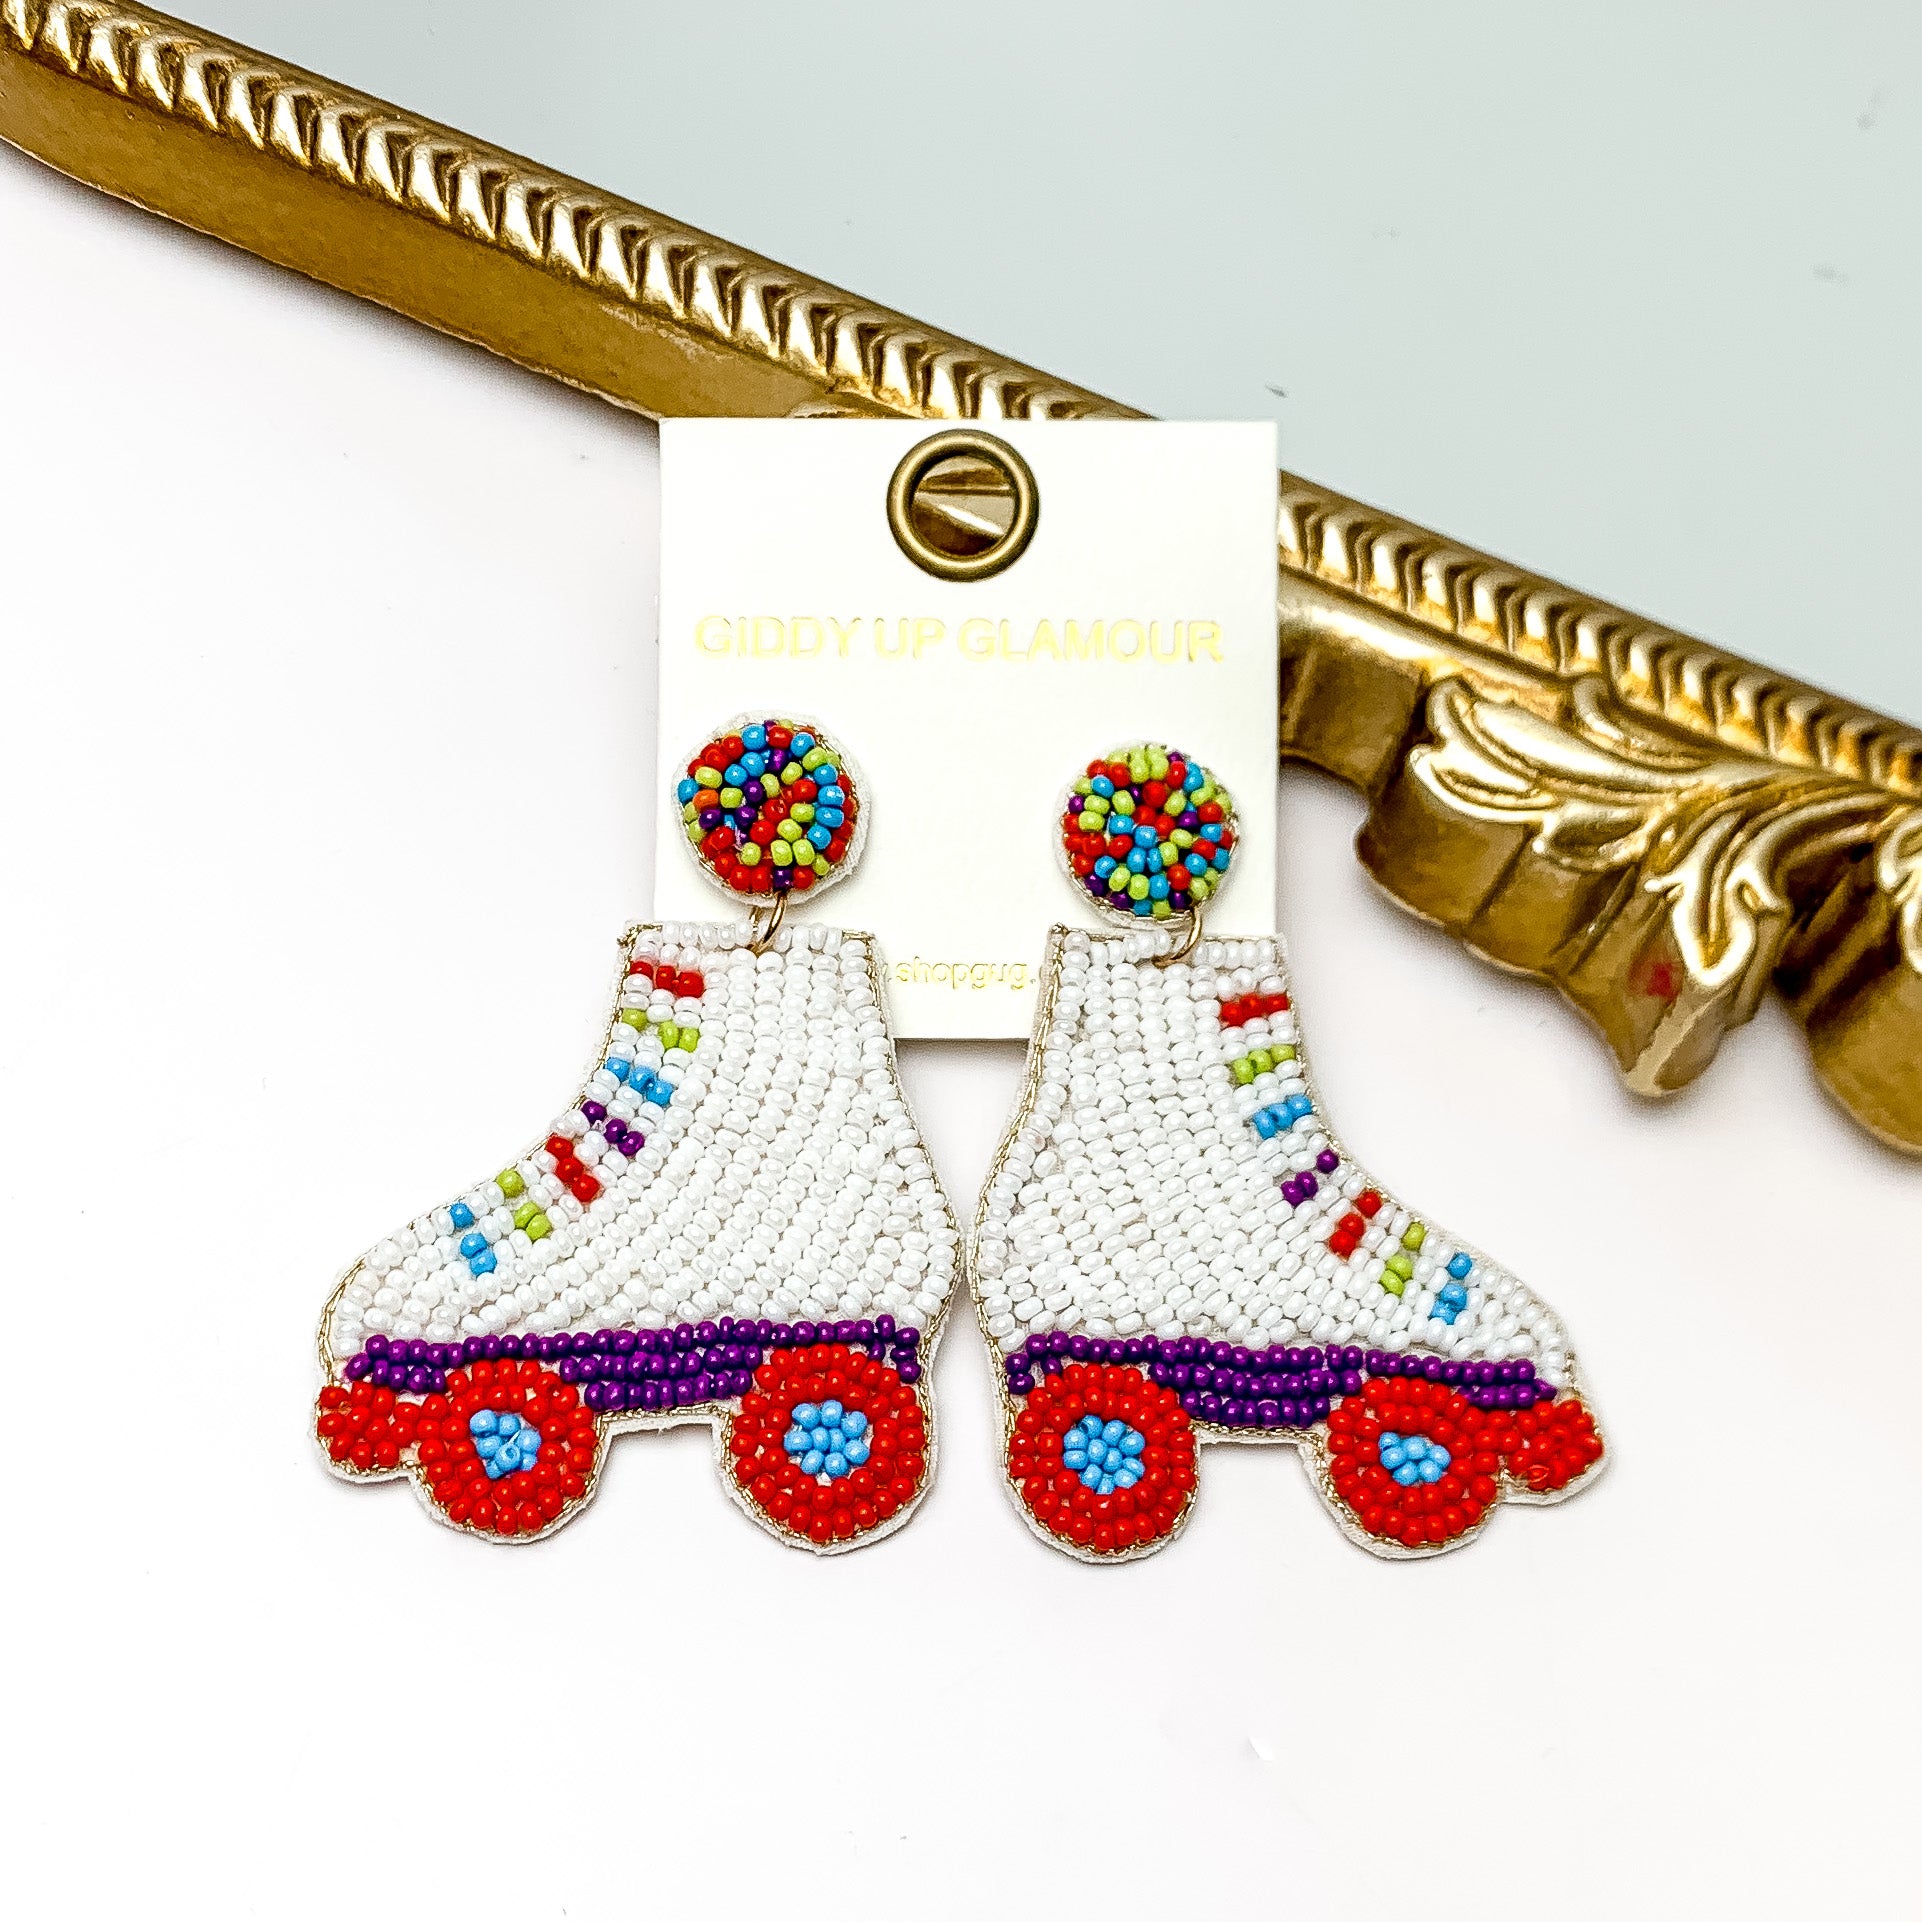 Roller Girl Beaded Roller Skate Earrings in Multicolor. Pictured on a white background with the earrings laying against a mirror with a gold trim.